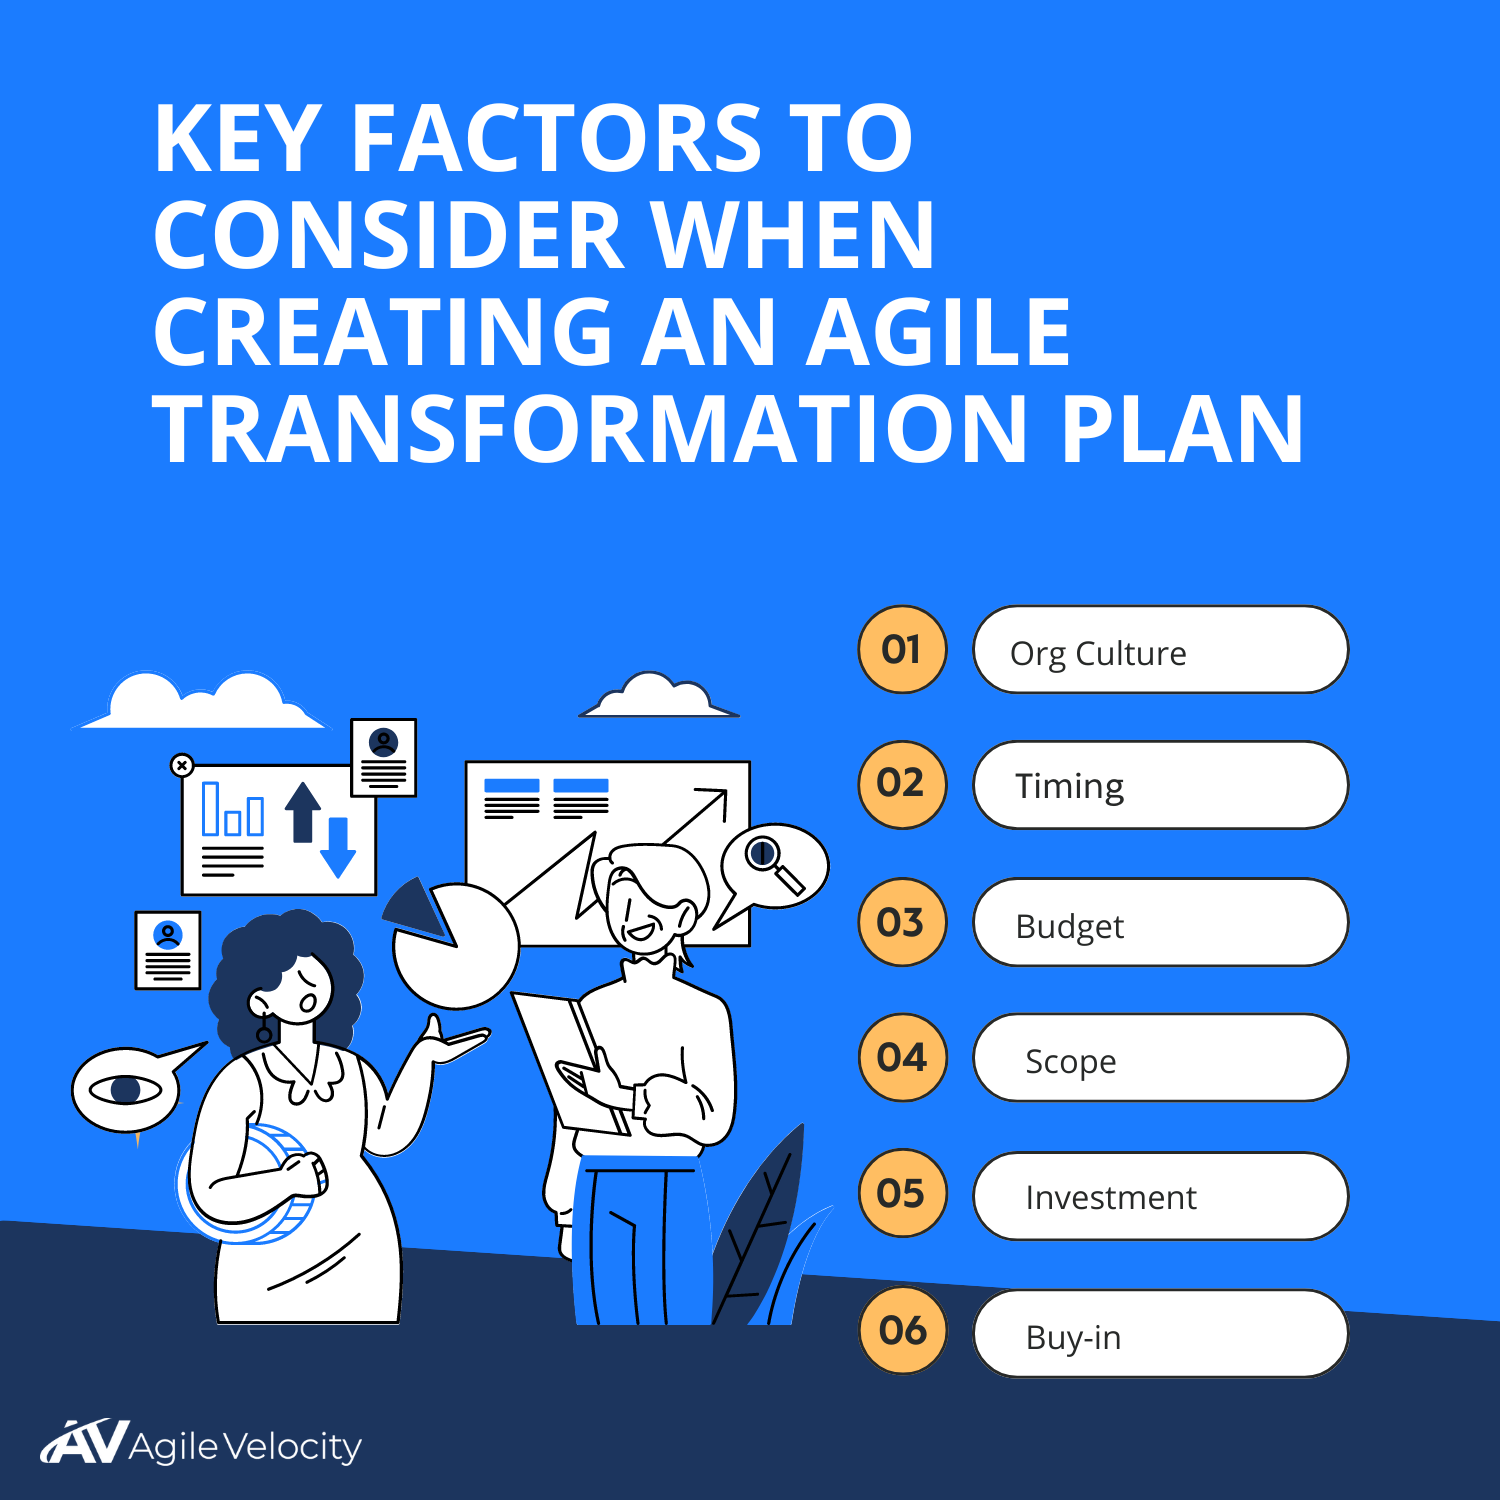 key factors to consider When creating an agile transformation plan